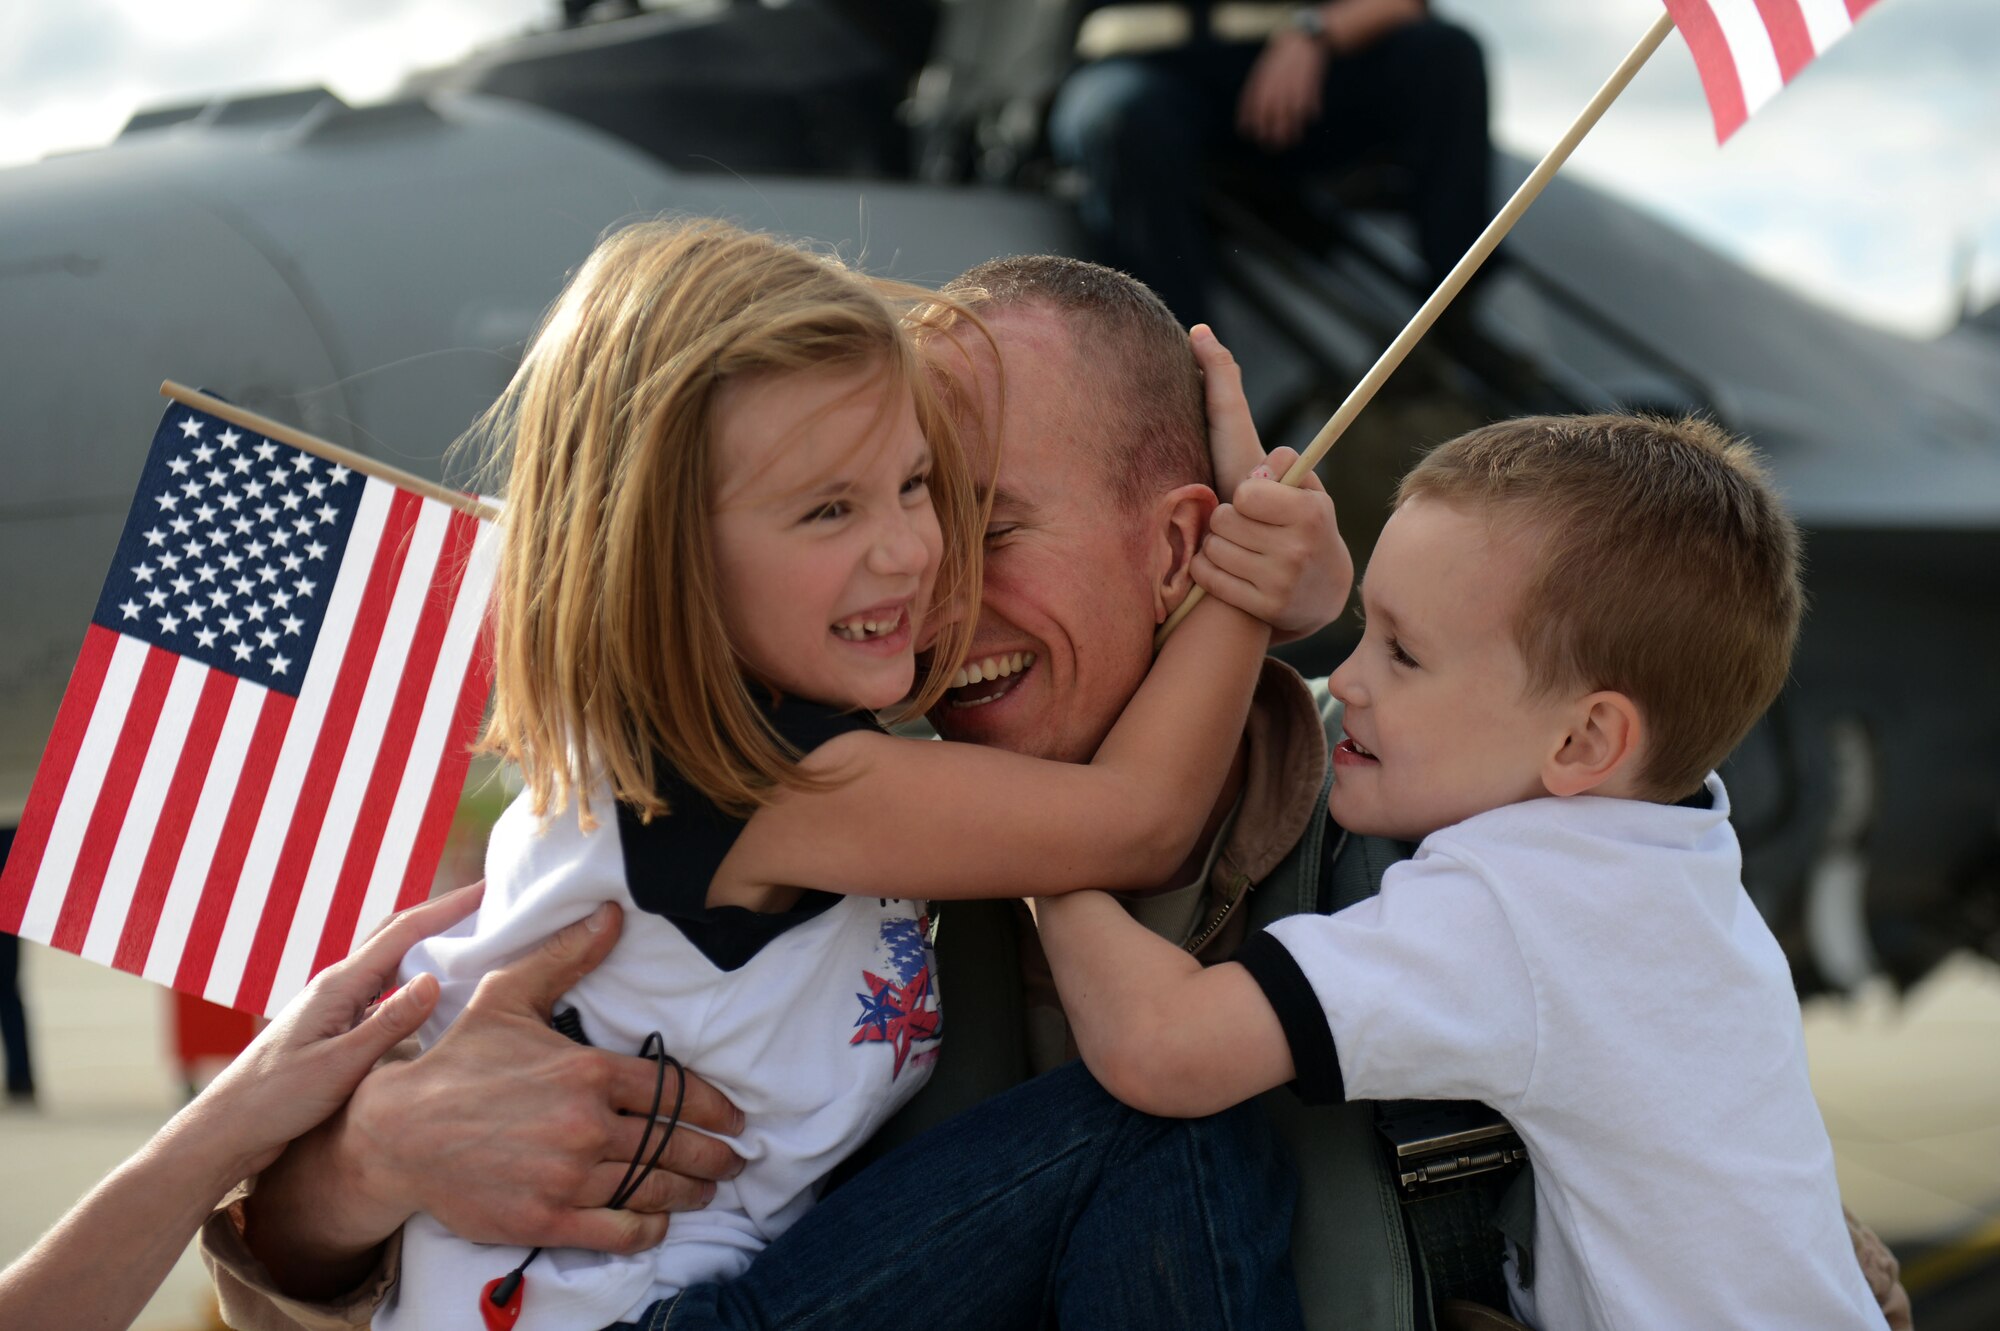 SPANGDAHLEM AIR BASE, Germany – U.S. Air Force Maj. Greg Boland, 480th Fighter Squadron pilot from Reading, Pa., hugs his children Rylie and Carter Sept. 15, 2013, after returning from a deployment. Airmen assigned to the 480th FS train to provide decisive combat power to combatant commanders for contingency operations down range. (U.S. Air Force photo by Airman 1st Class Gustavo Castillo/Released)